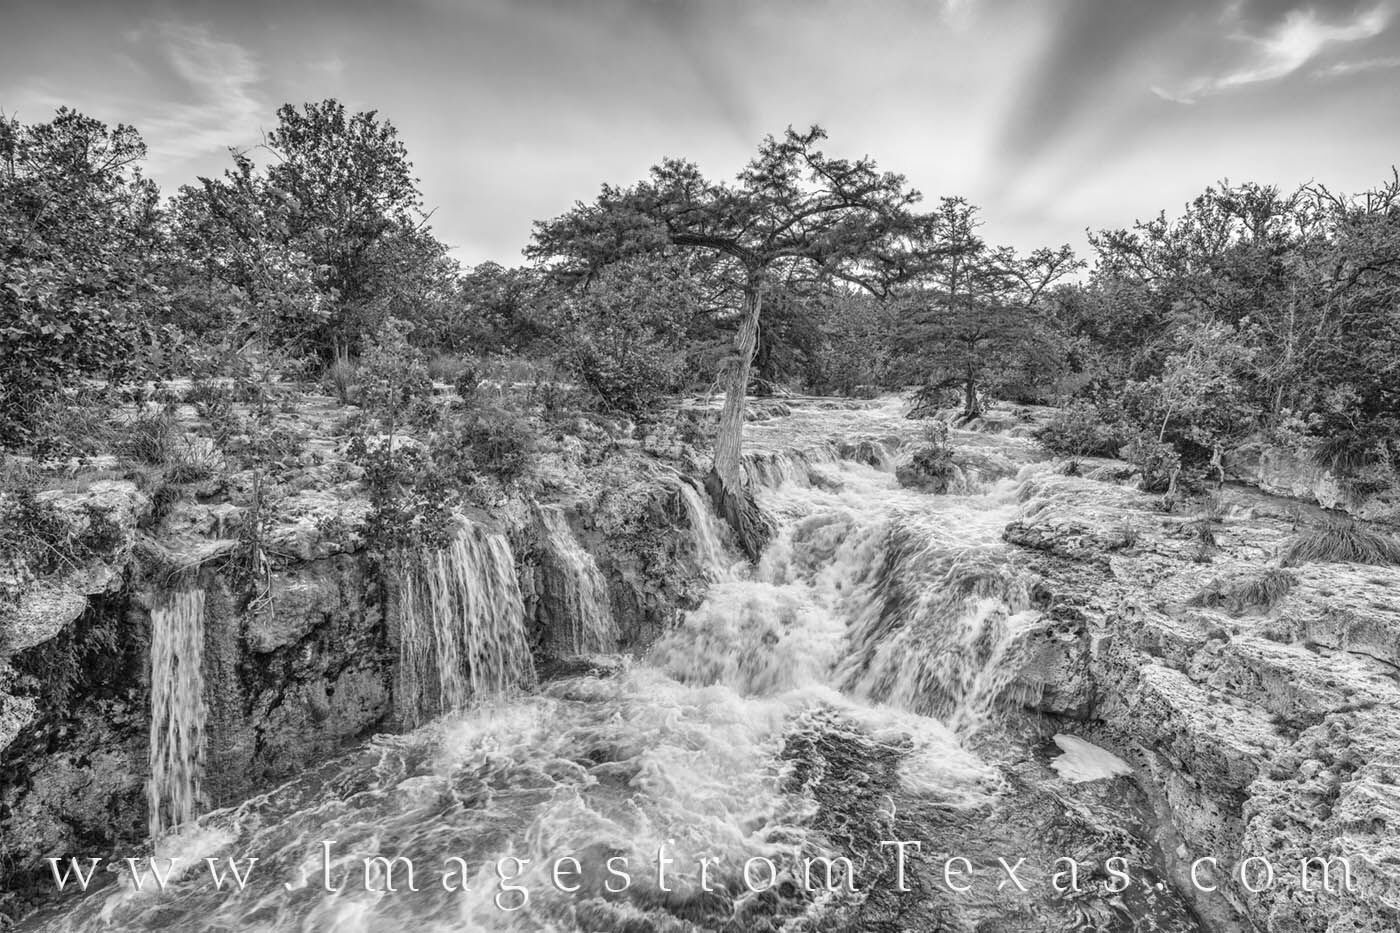 From south of Kendalia, this black and white photograph shows a beautiful waterfall in the hill country after a rain. The sun...